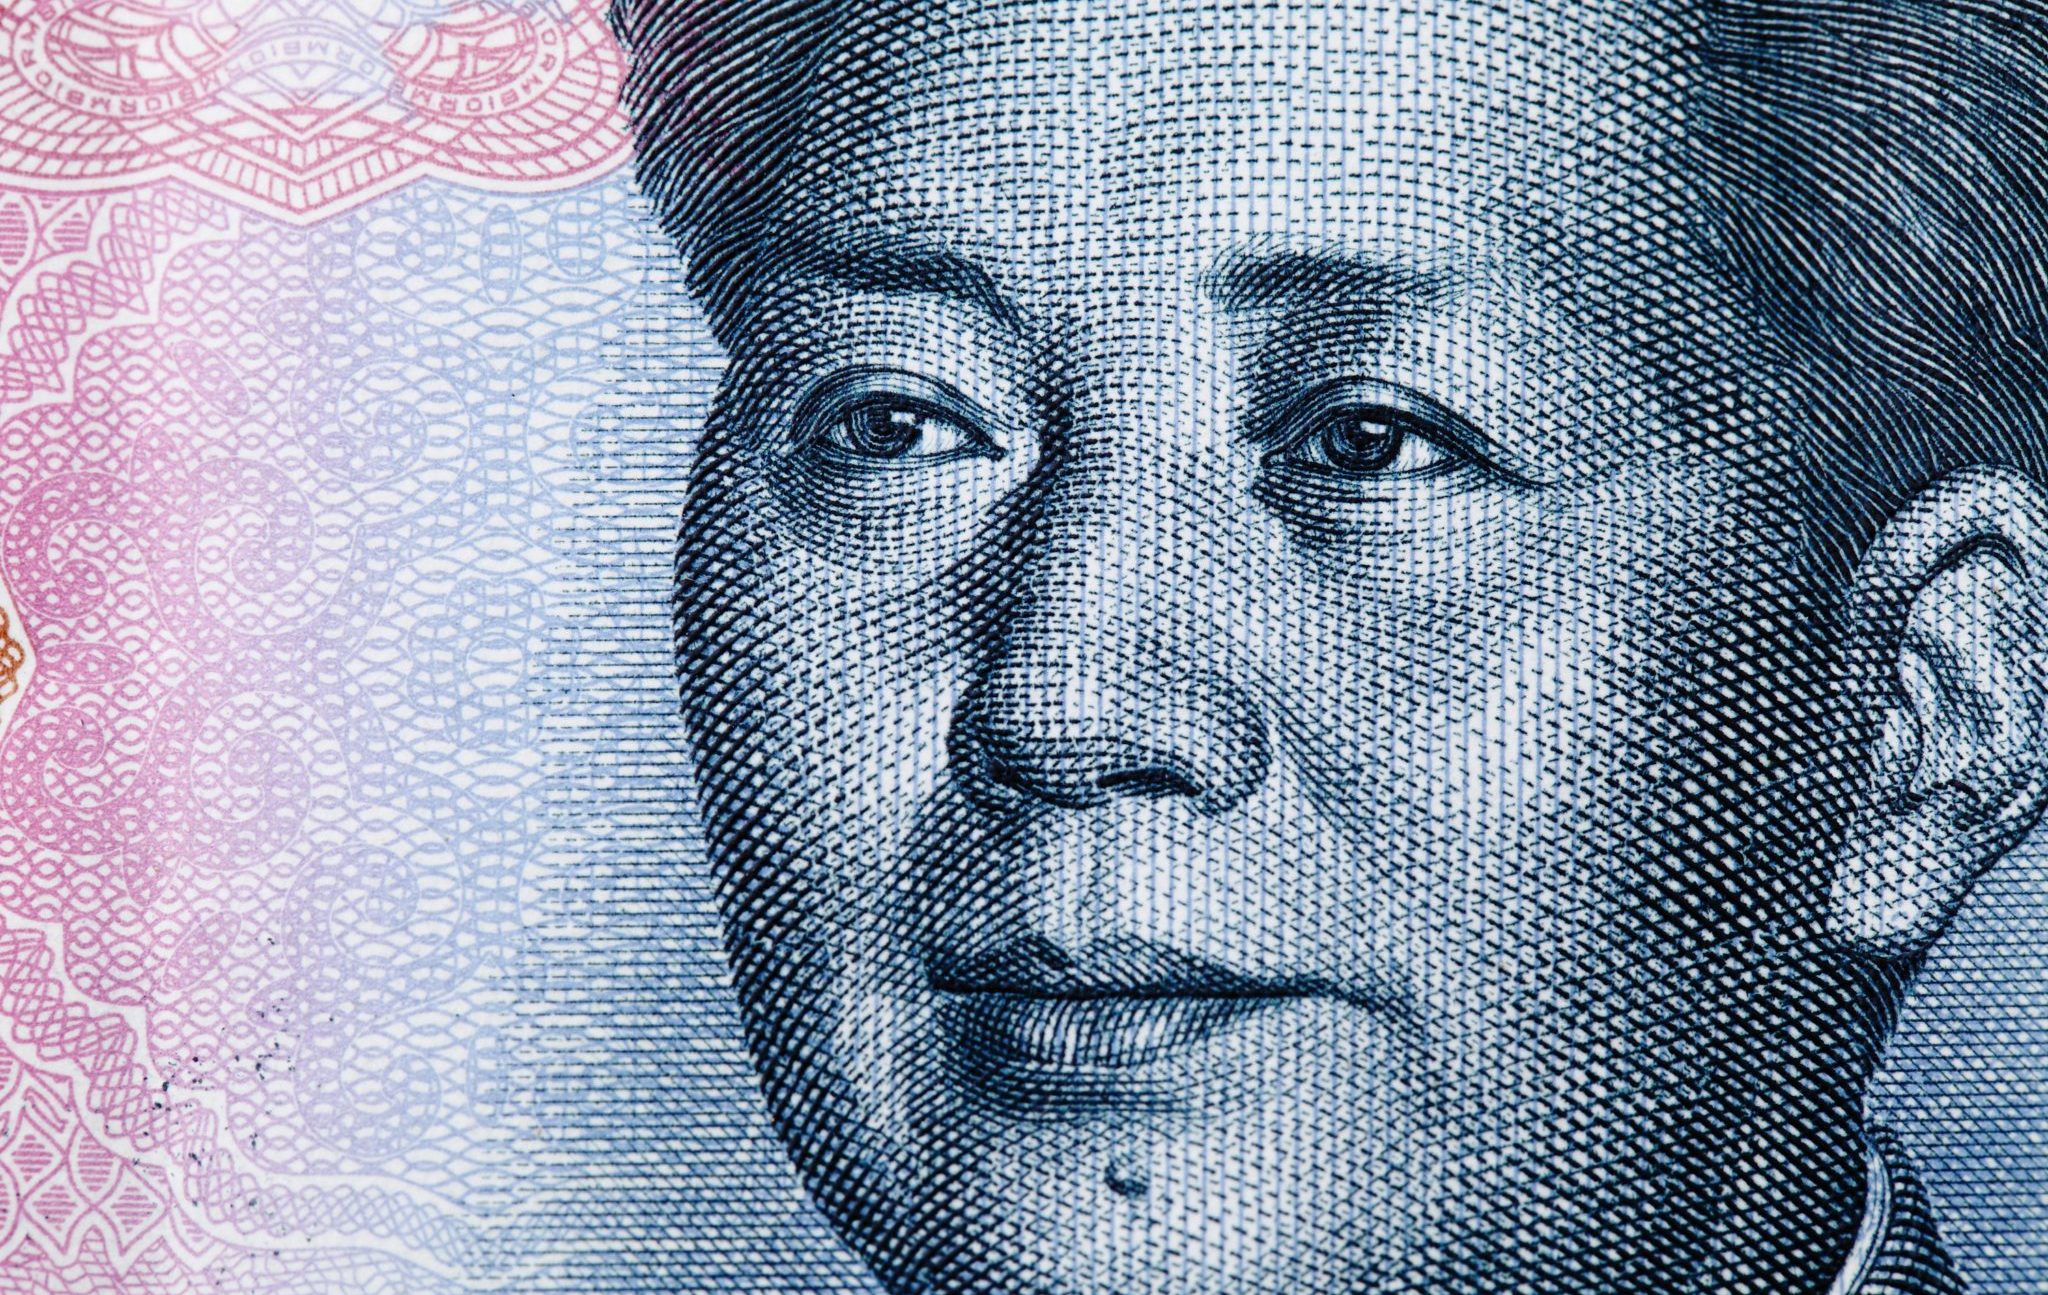 Yuan,Notes,From,China's,Currency.,Chinese,Banknotes.